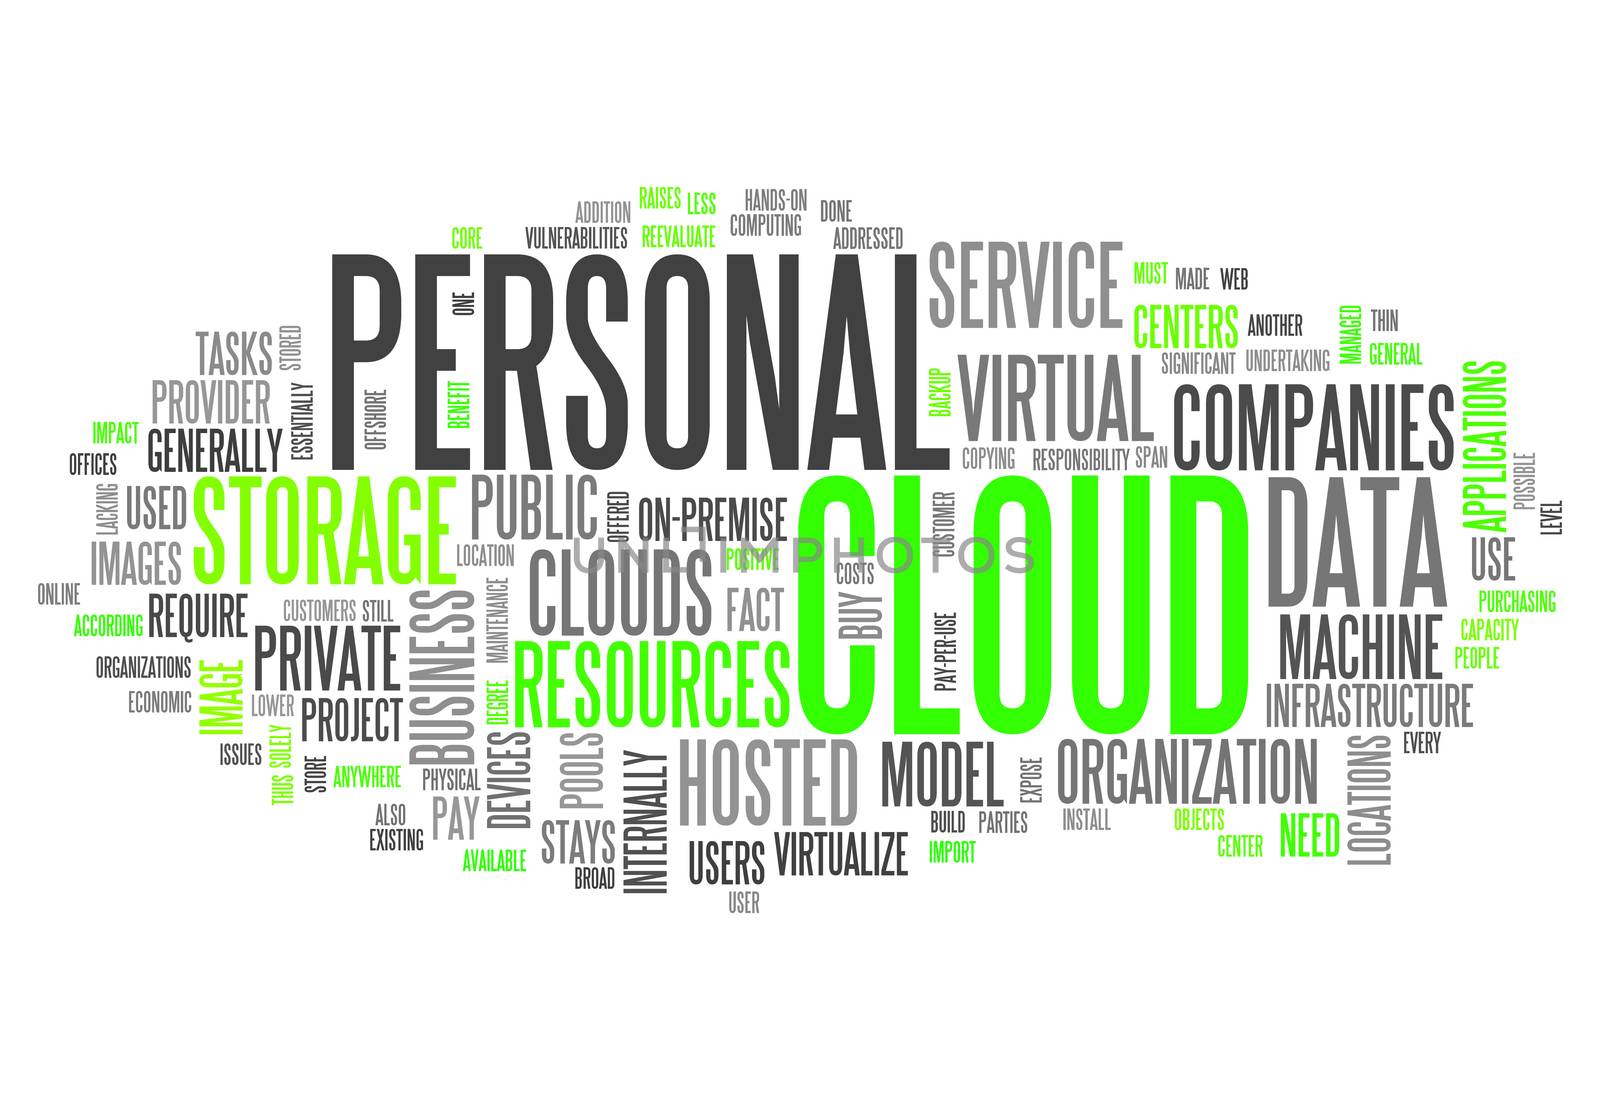 Word Cloud with Personal Cloud related tags